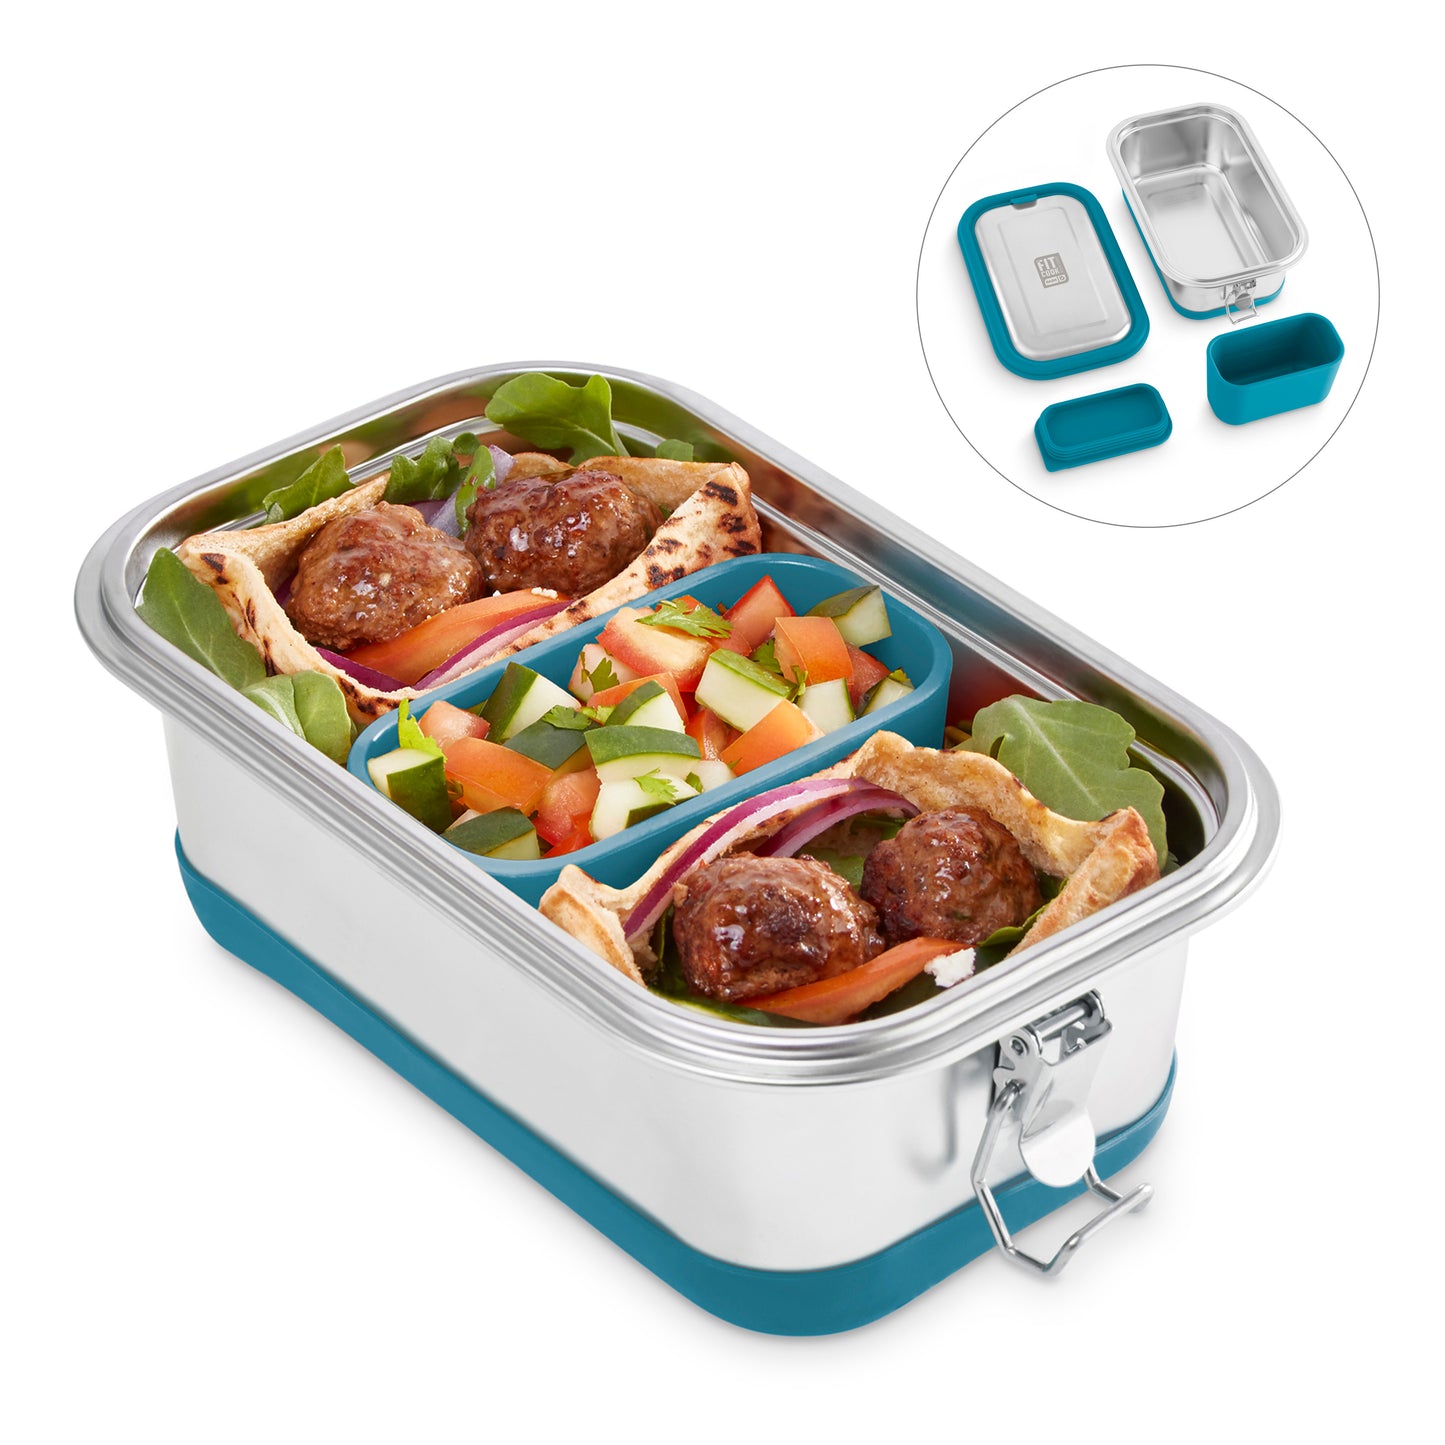 Stainless Steel Lunch Box Tools and Gadgets The Fit Cook x Dash Ocean  